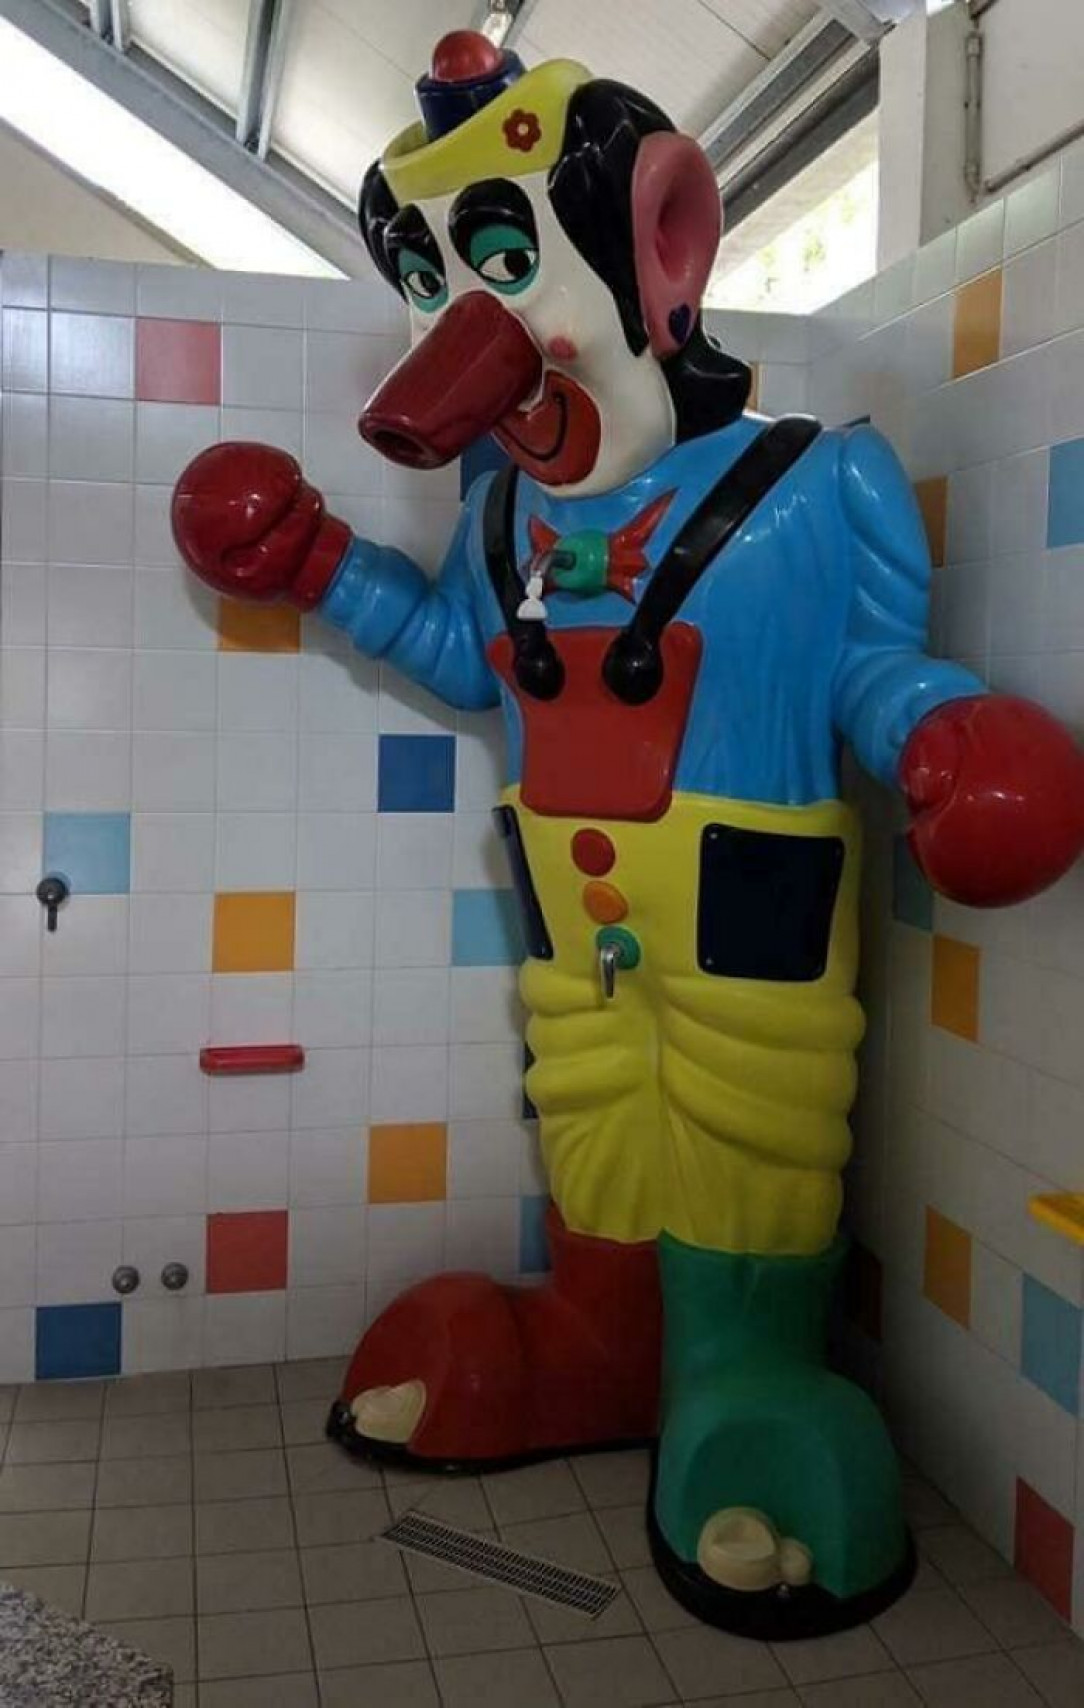 This is a Clown shower for children